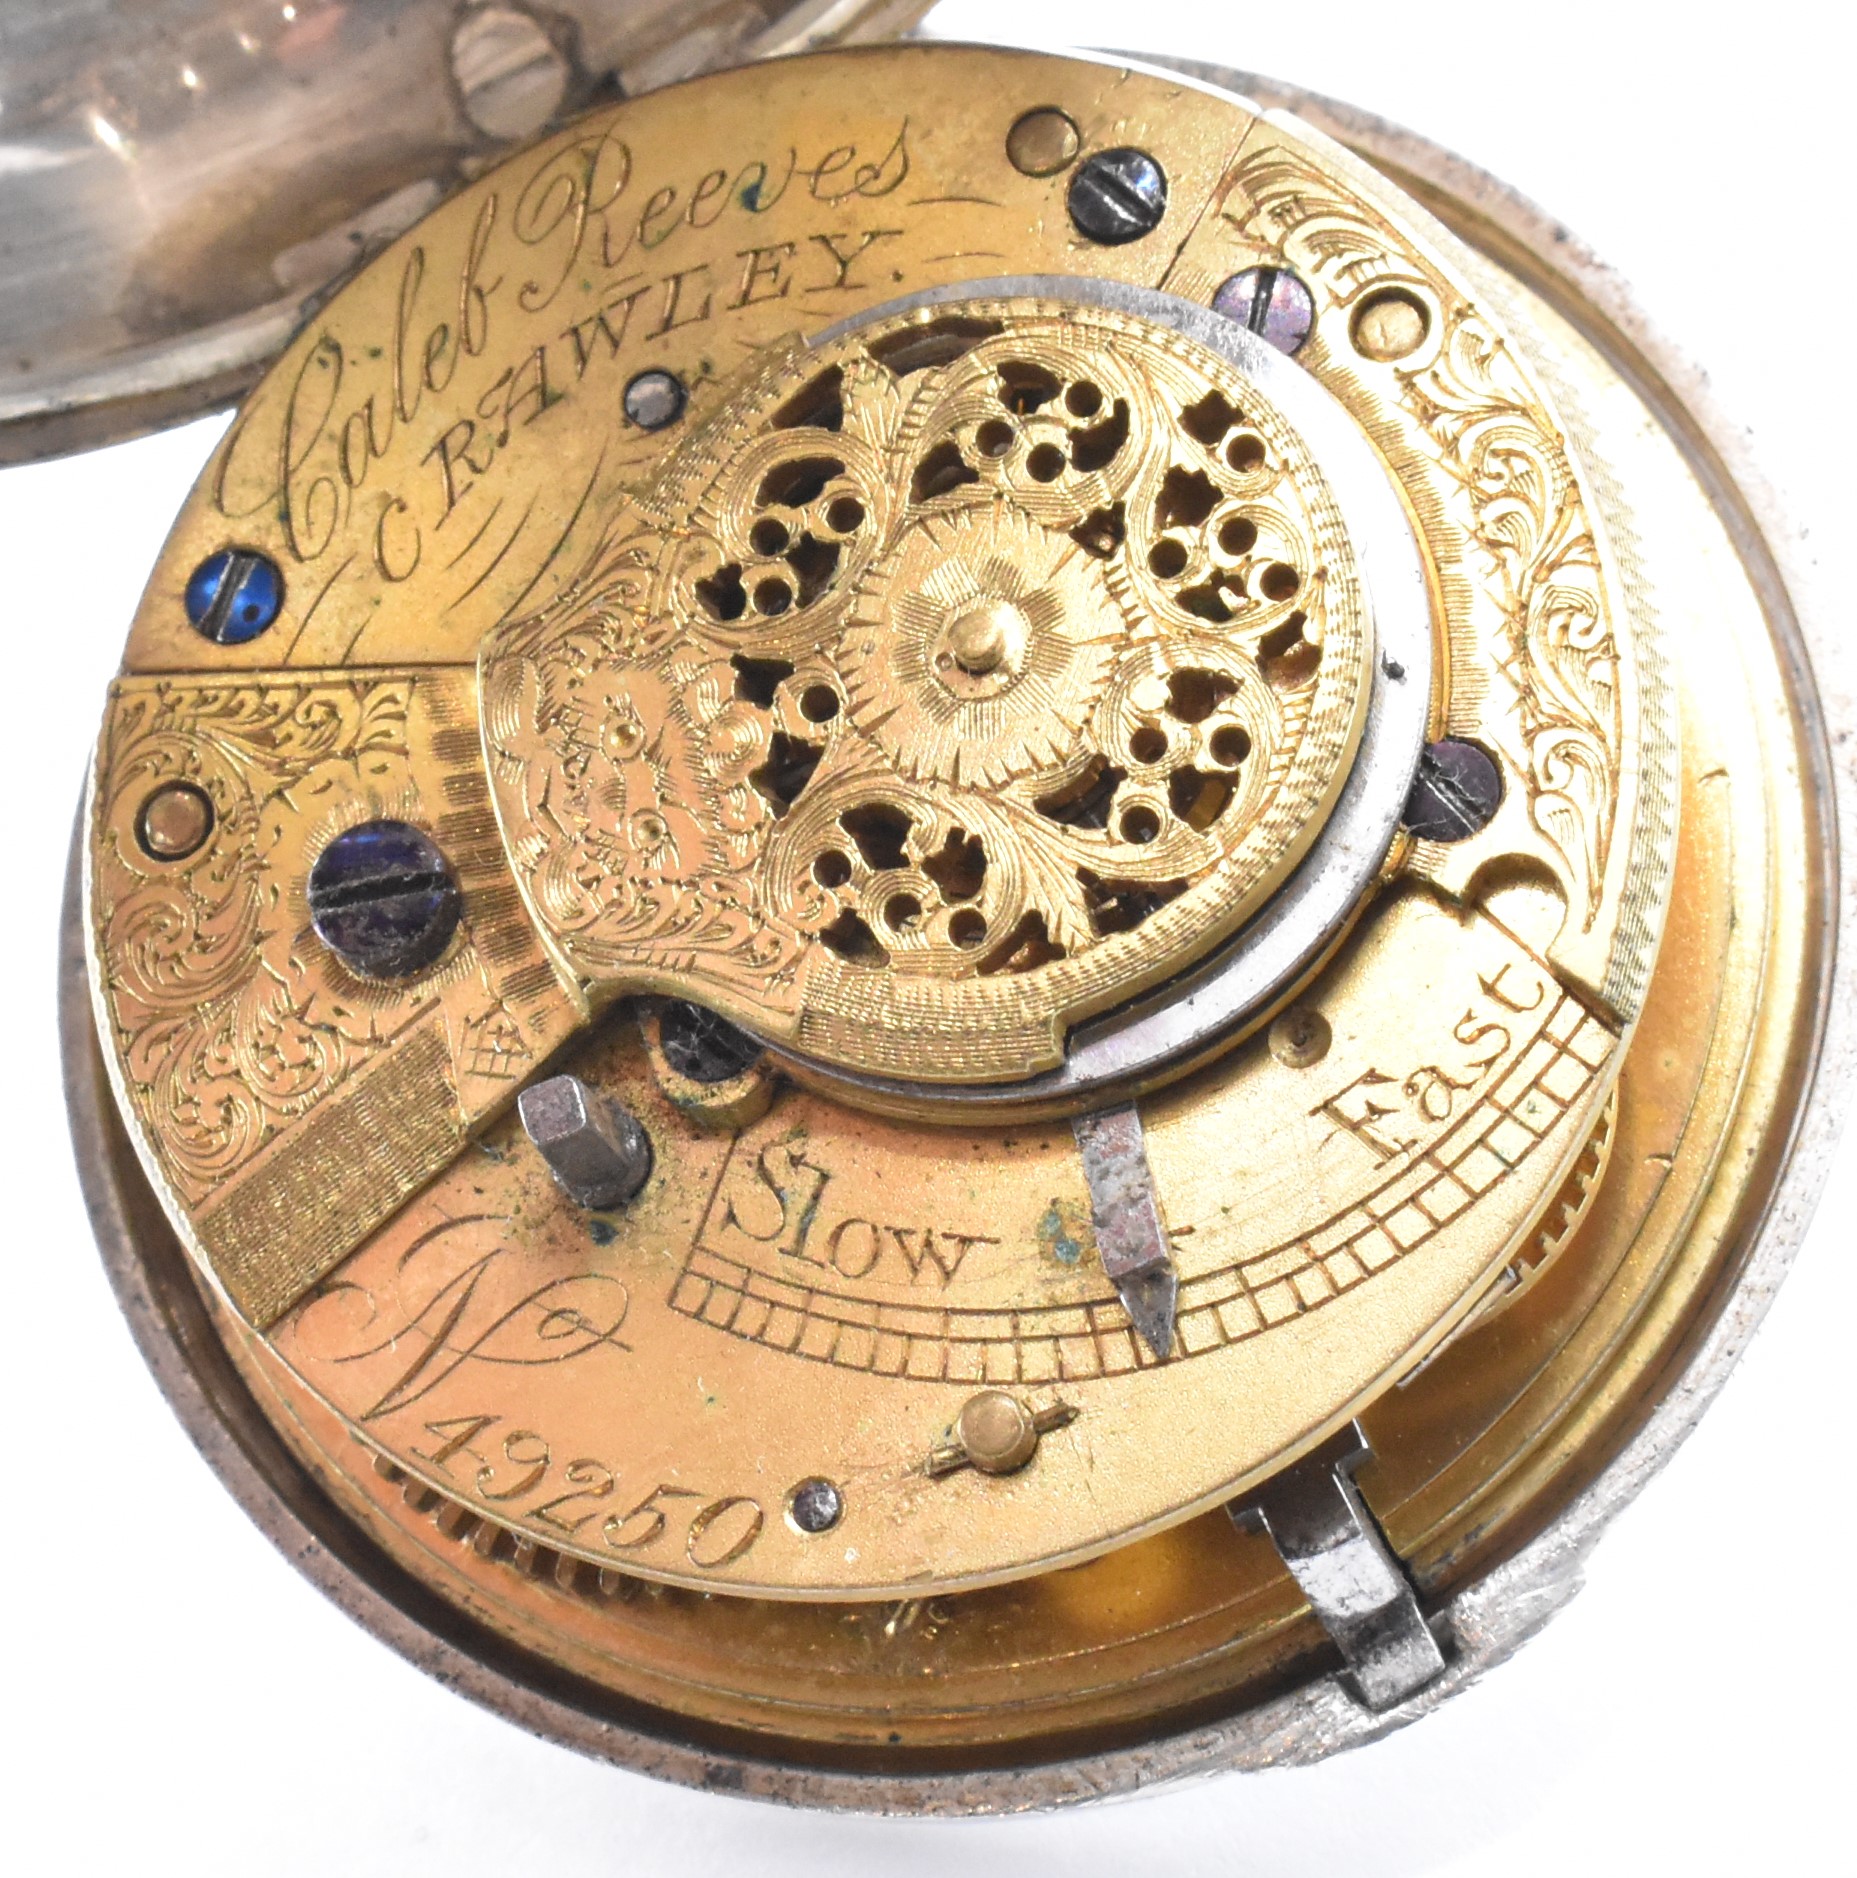 VICTORIAN HALLMARKED SILVER CALEB REEVES POCKET WATCH - Image 5 of 9